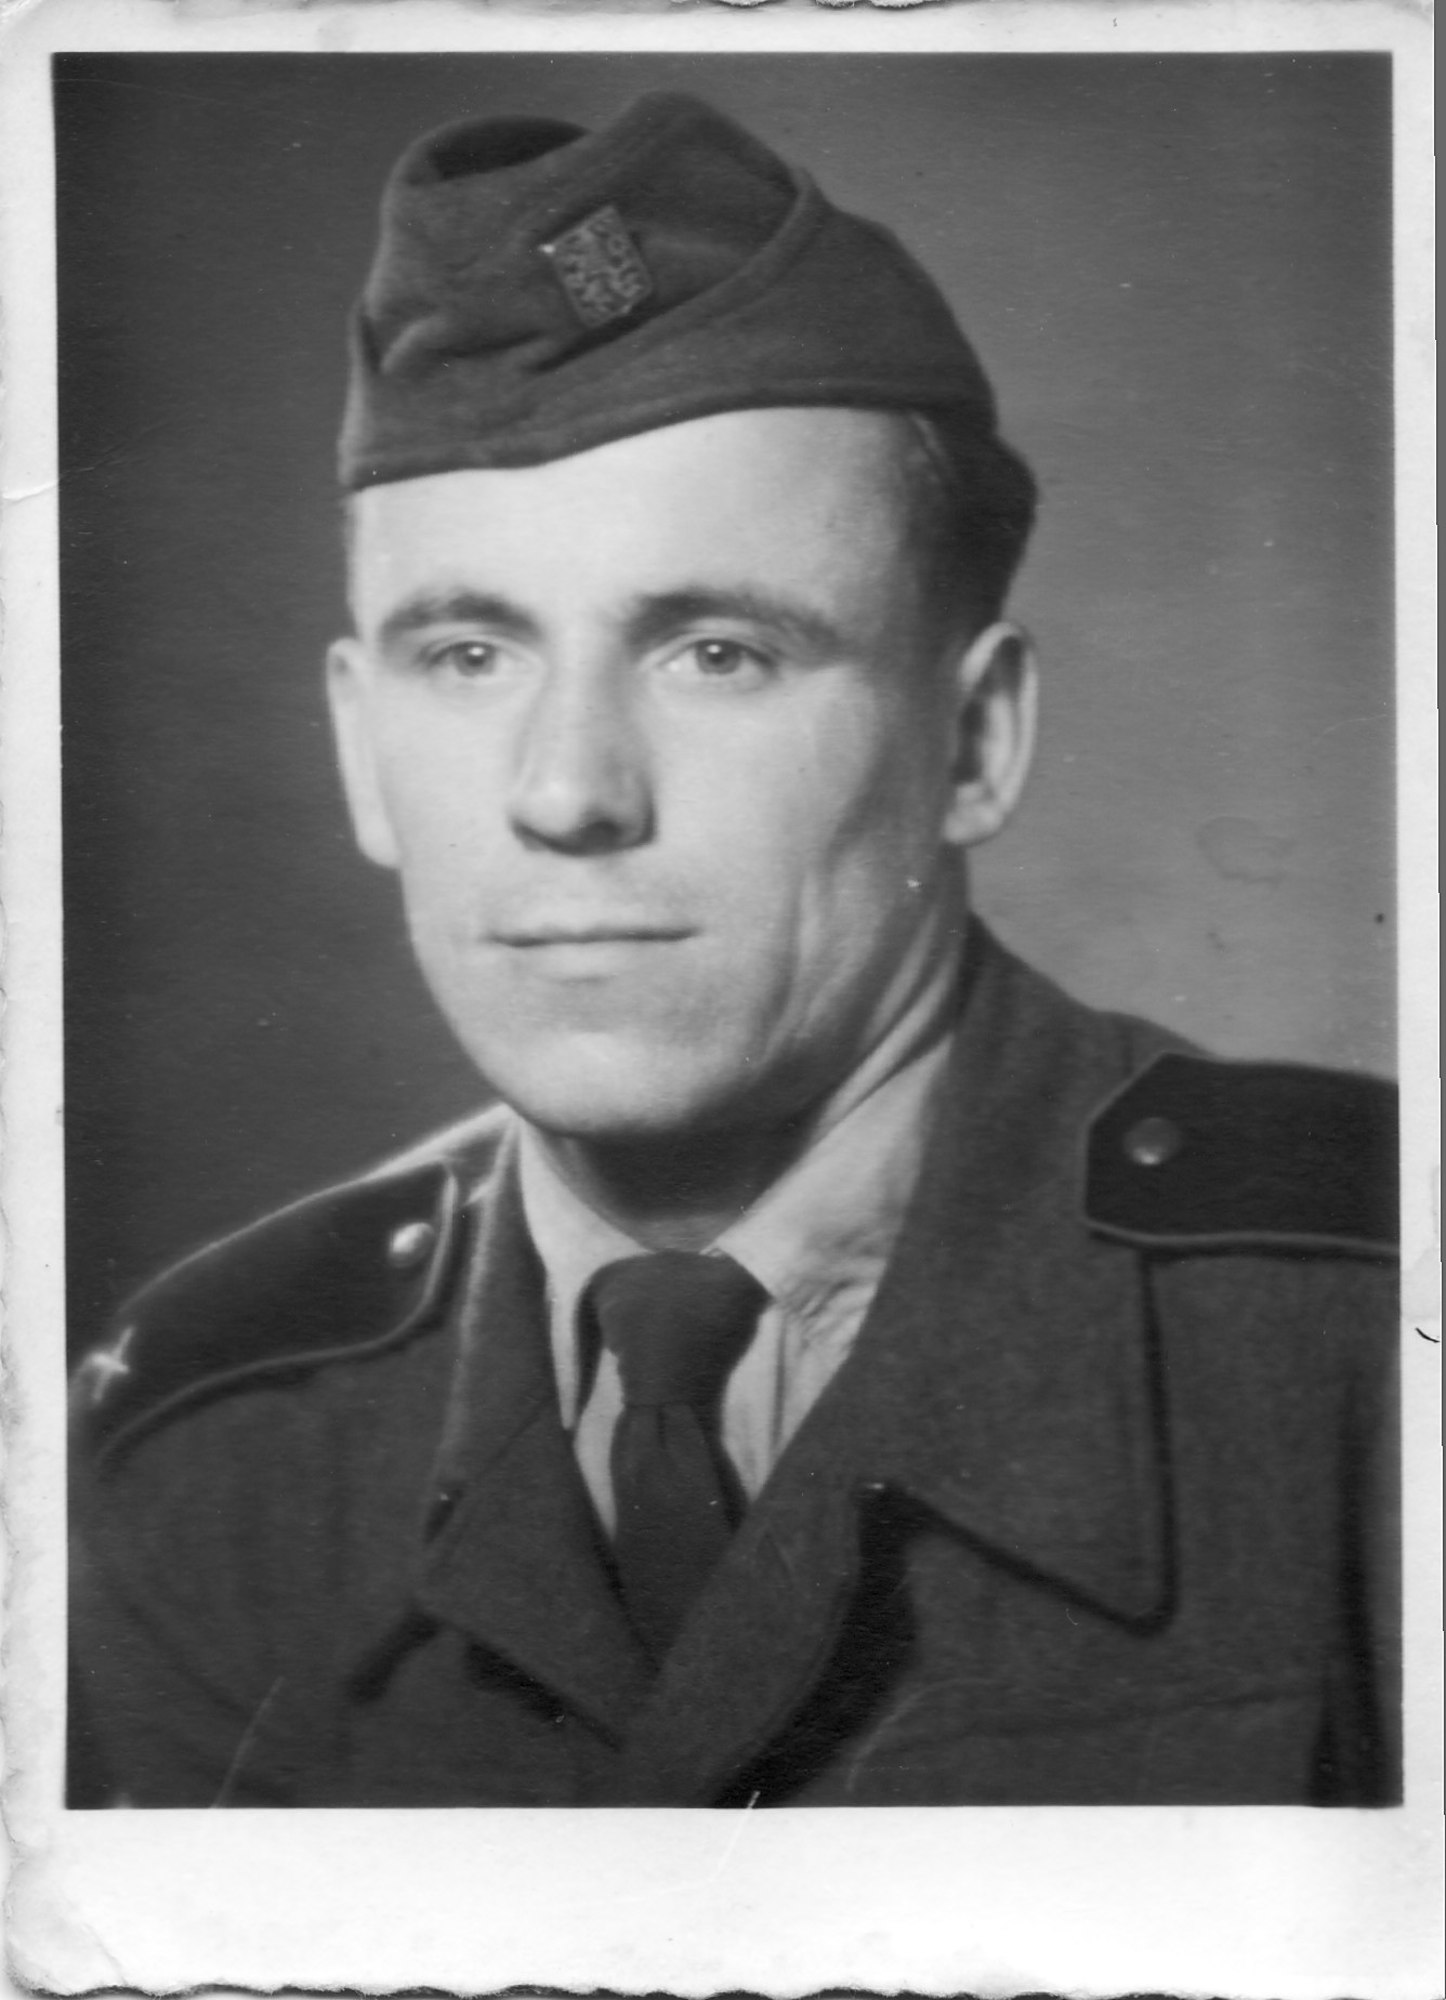 Rudolf Hadwiger in the army from 1954 to 1956 